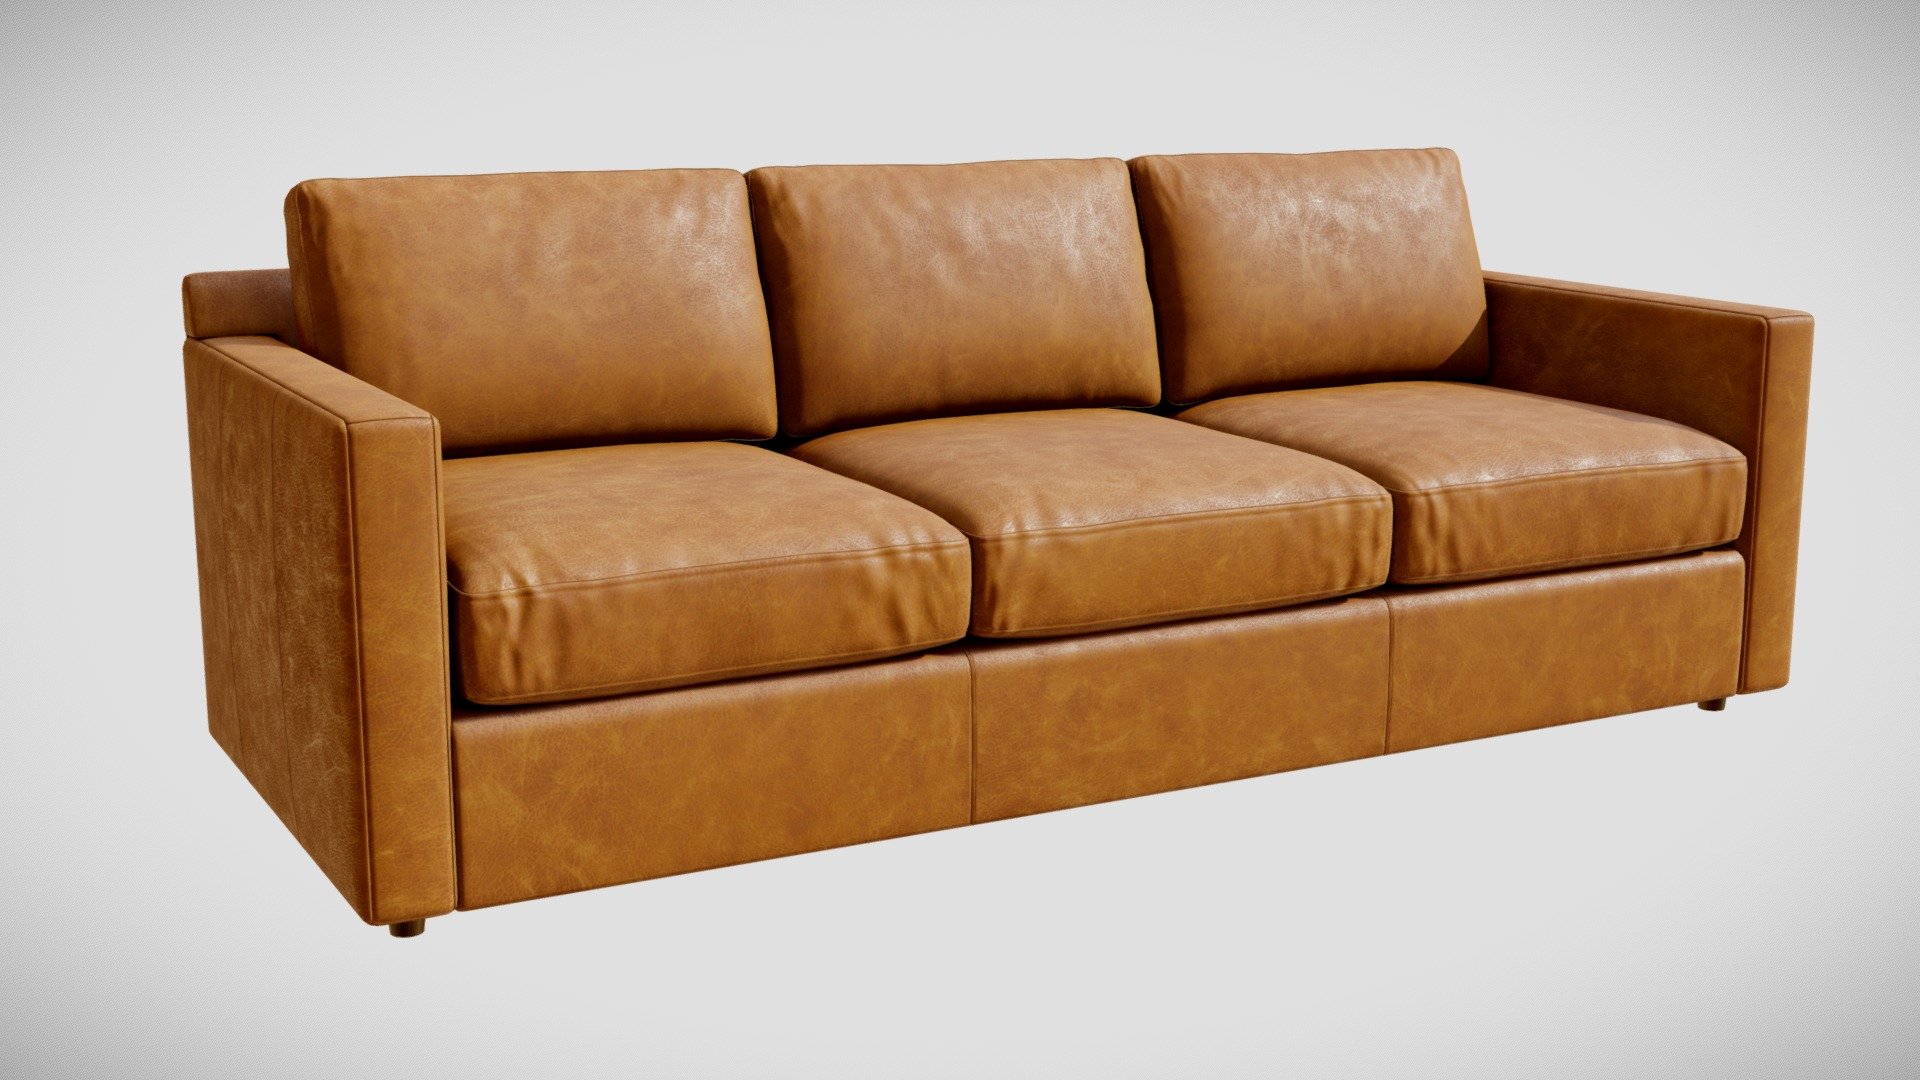 High-quality 3d model of a Crete and Barrel Barrett II Leather 3 Seat Sofa.

Original: https://www.crateandbarrel.com/barrett-ii-leather-3-seat-sofa/s271677

Formats:
3dsMax 2014 V-ray and standard materials
FBX V-ray and standard materials
OBJ standard materials

18031 polygons
18364 vertices - Crate&Barrel Barrett II Sofa - Buy Royalty Free 3D model by 3detto 3d model